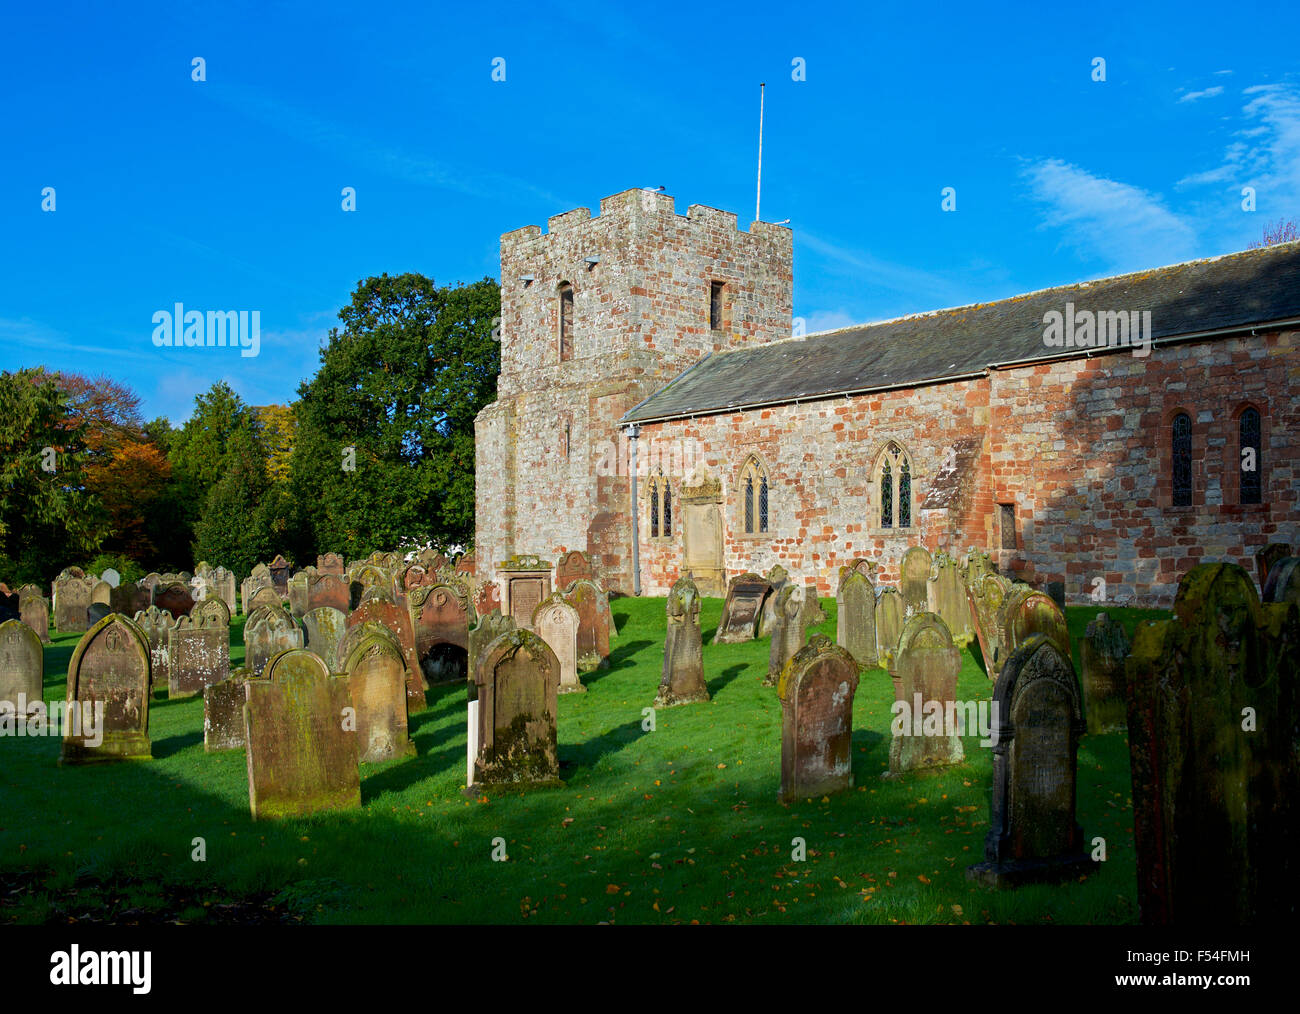 St Michael's Church, with fortified tower, Burgh by Sands, Cumbria, England UK Stock Photo